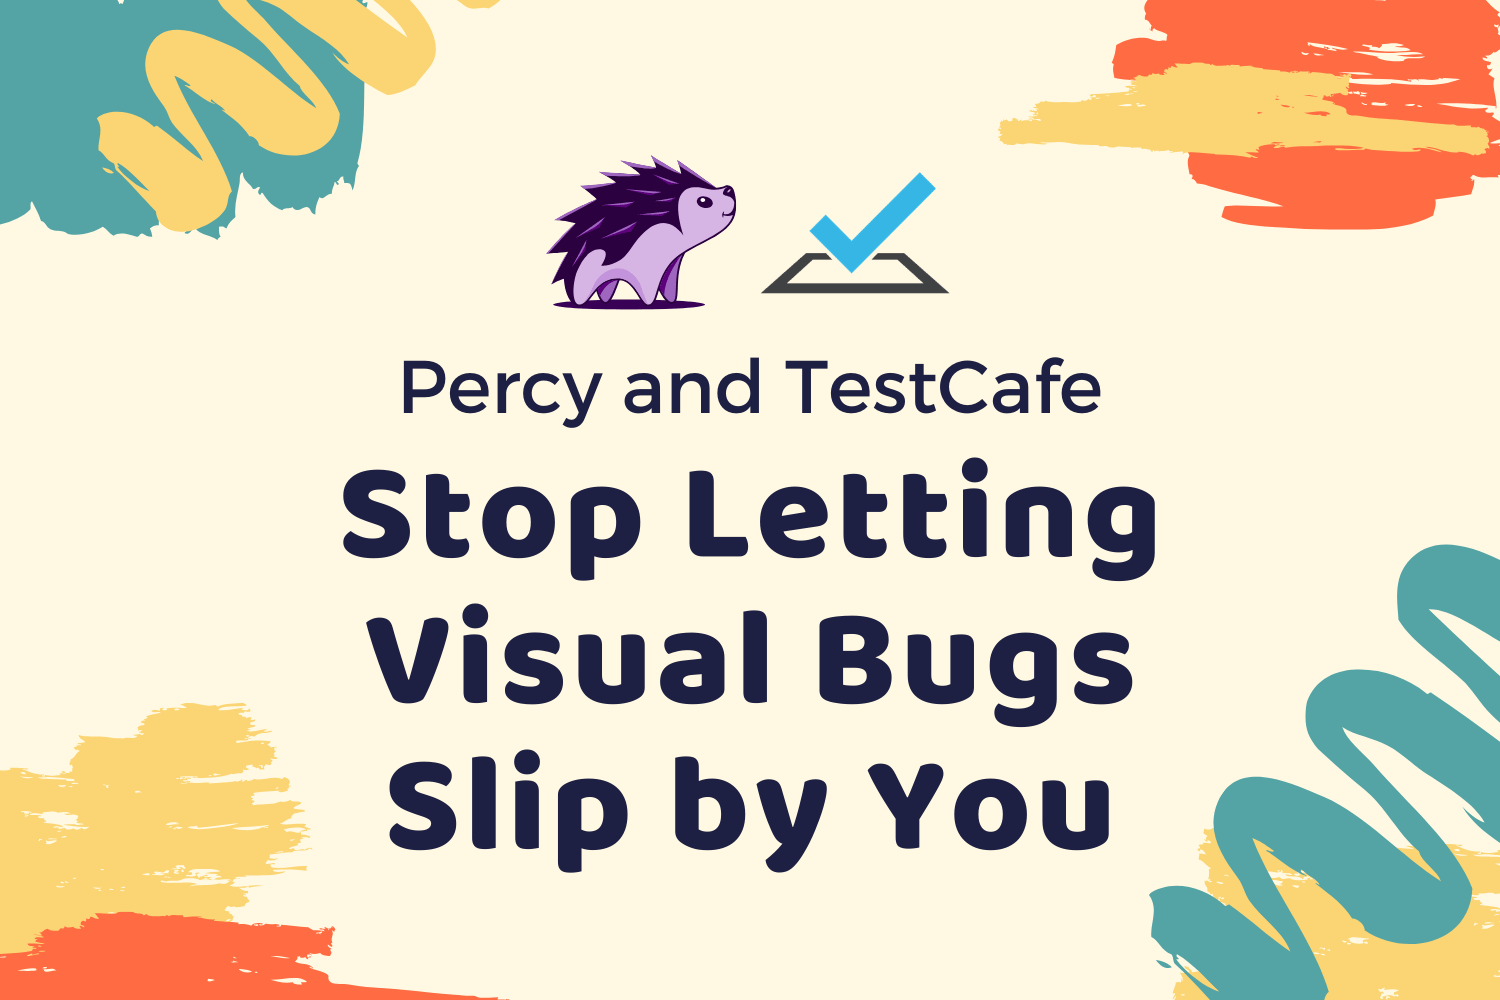 Percy and TestCafe: Stop Letting Visual Bugs Slip by You